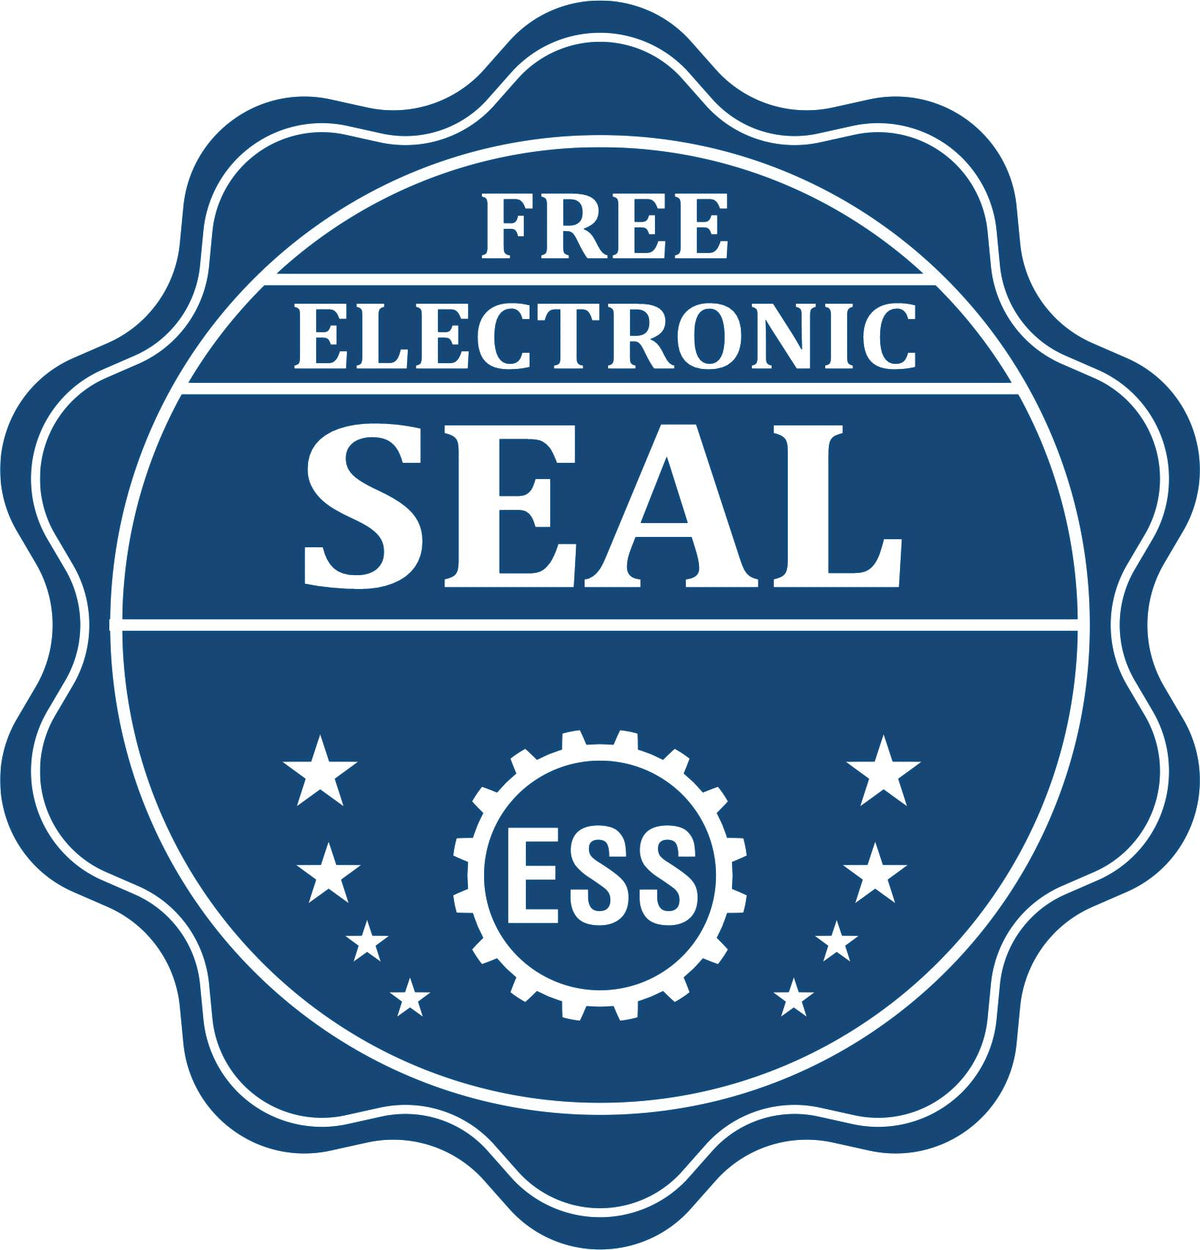 A badge showing a free electronic seal for the Handheld Montana Professional Engineer Embosser with stars and the ESS gear on the emblem.